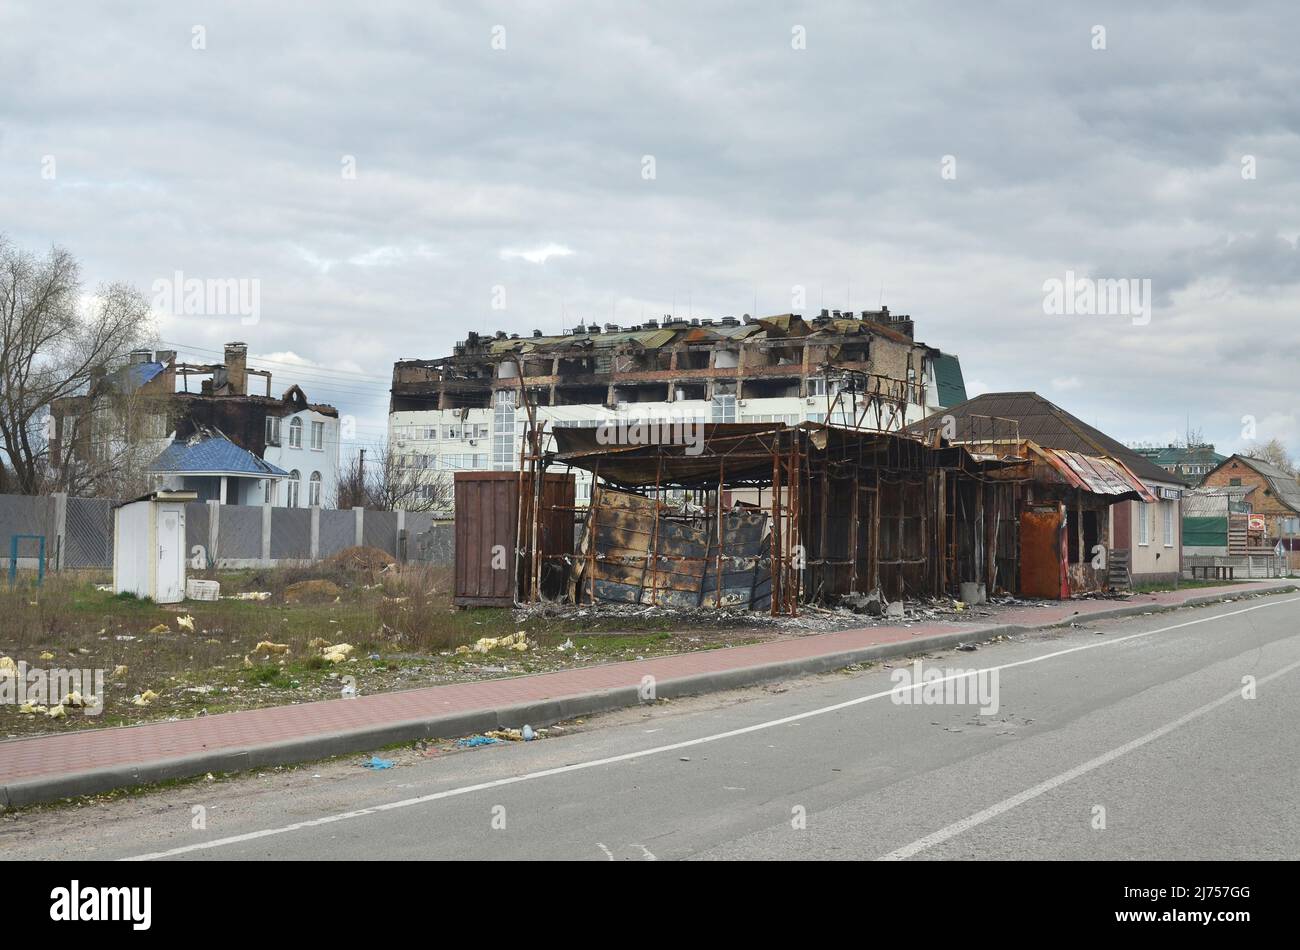 Myla village, Kyiv region, Ukraine - Apr 11, 2022: Buildings and houses near the Zhytomyr highway were destroyed and burned by russian occupiers. Stock Photo